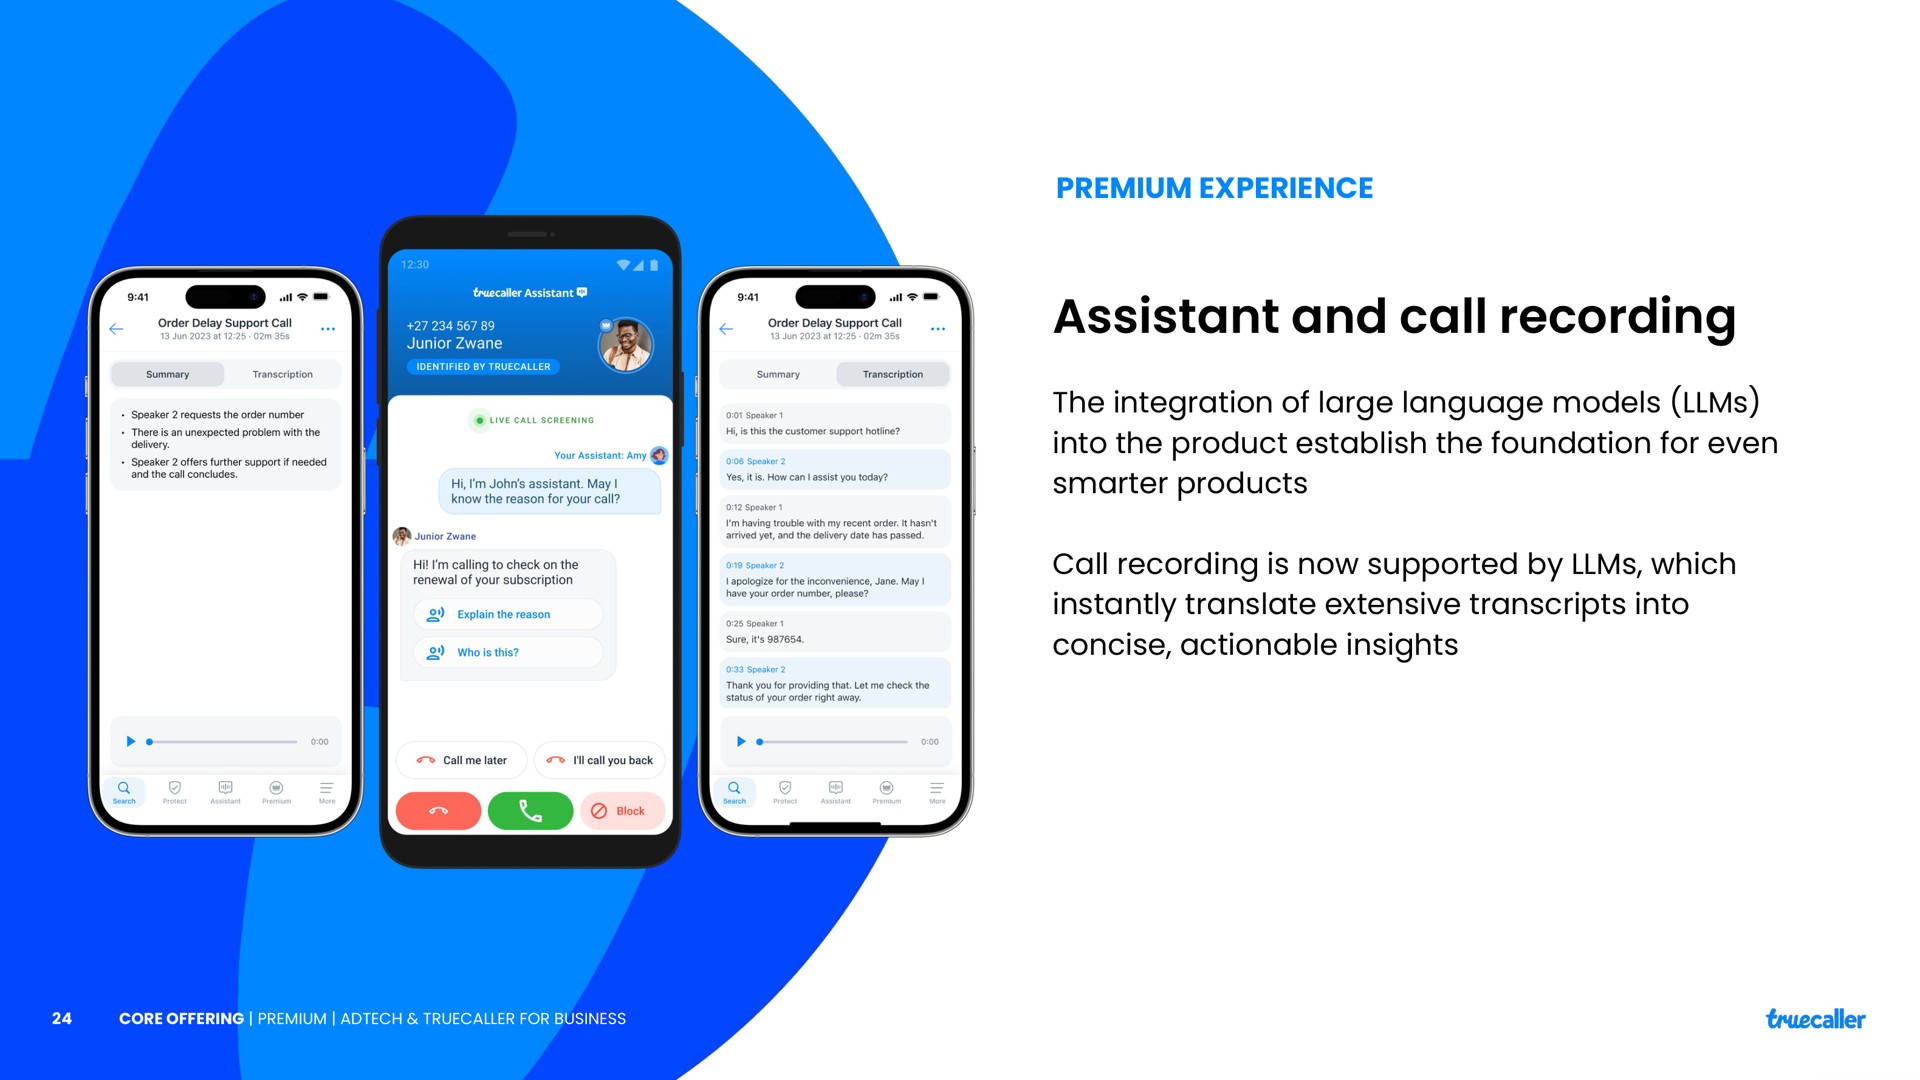 premium experience assistant and call recording the integration of large language models into the product establish the foundation for even products call recording is now supported by which instantly translate extensive transcripts into concise actionable insights | Truecaller